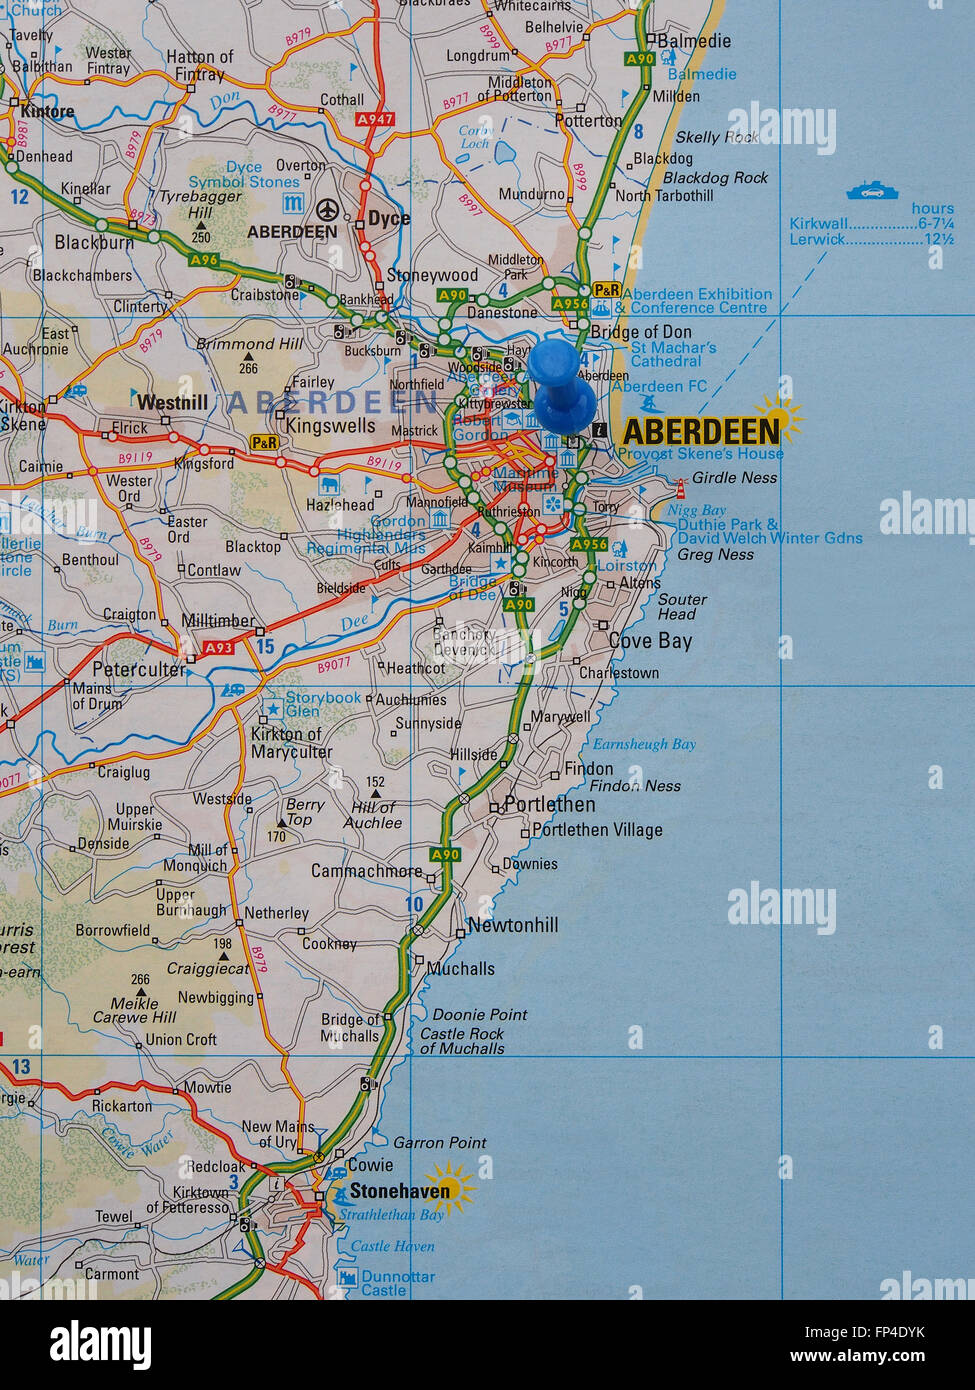 Road Map Of The East Coast Of Scotland Showing Aberdeen And The Stock Photo Alamy